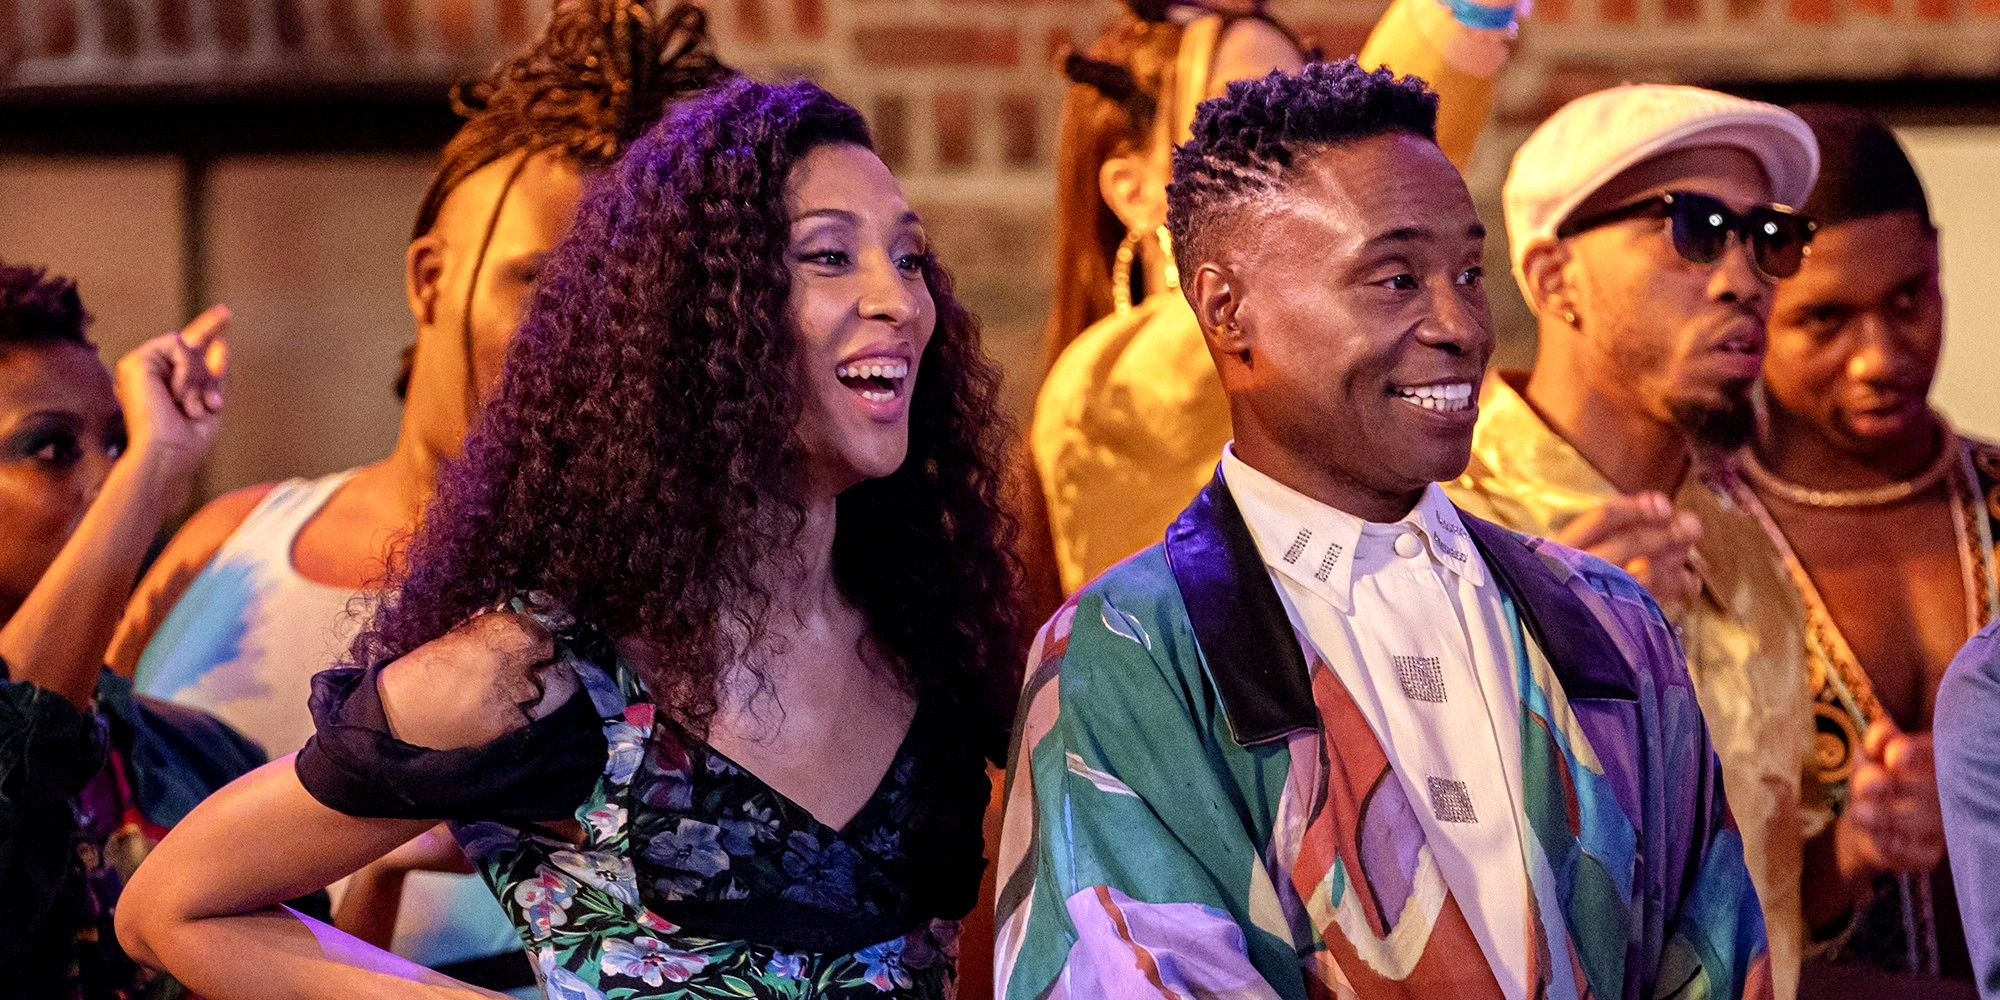 Michaela Jaé Rodriguez and Billy Porter smiling at a party in Pose